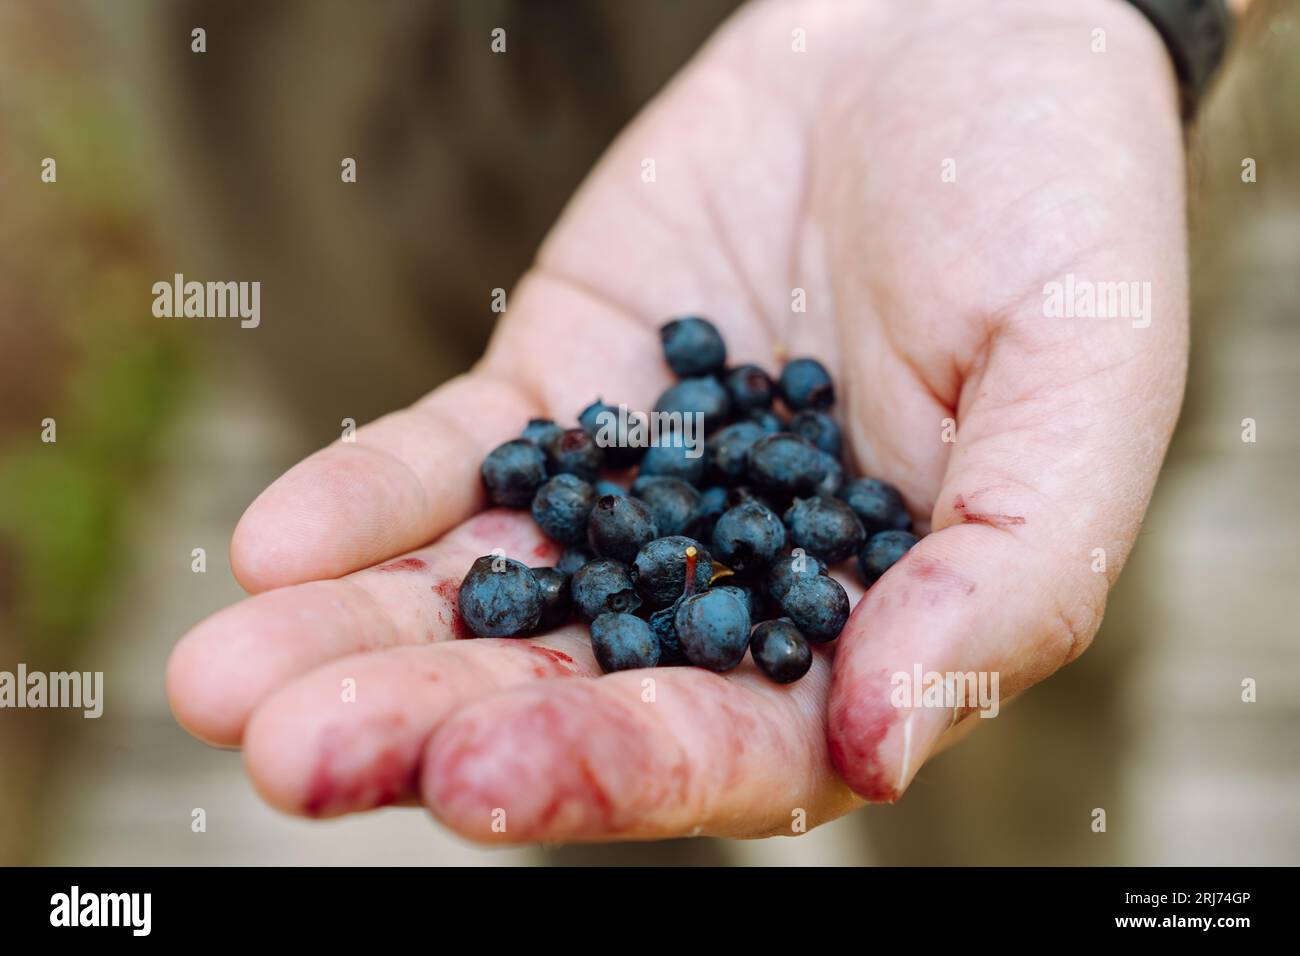 A man's hand with a handful of freshly picked wild blueberries. Stock Photo